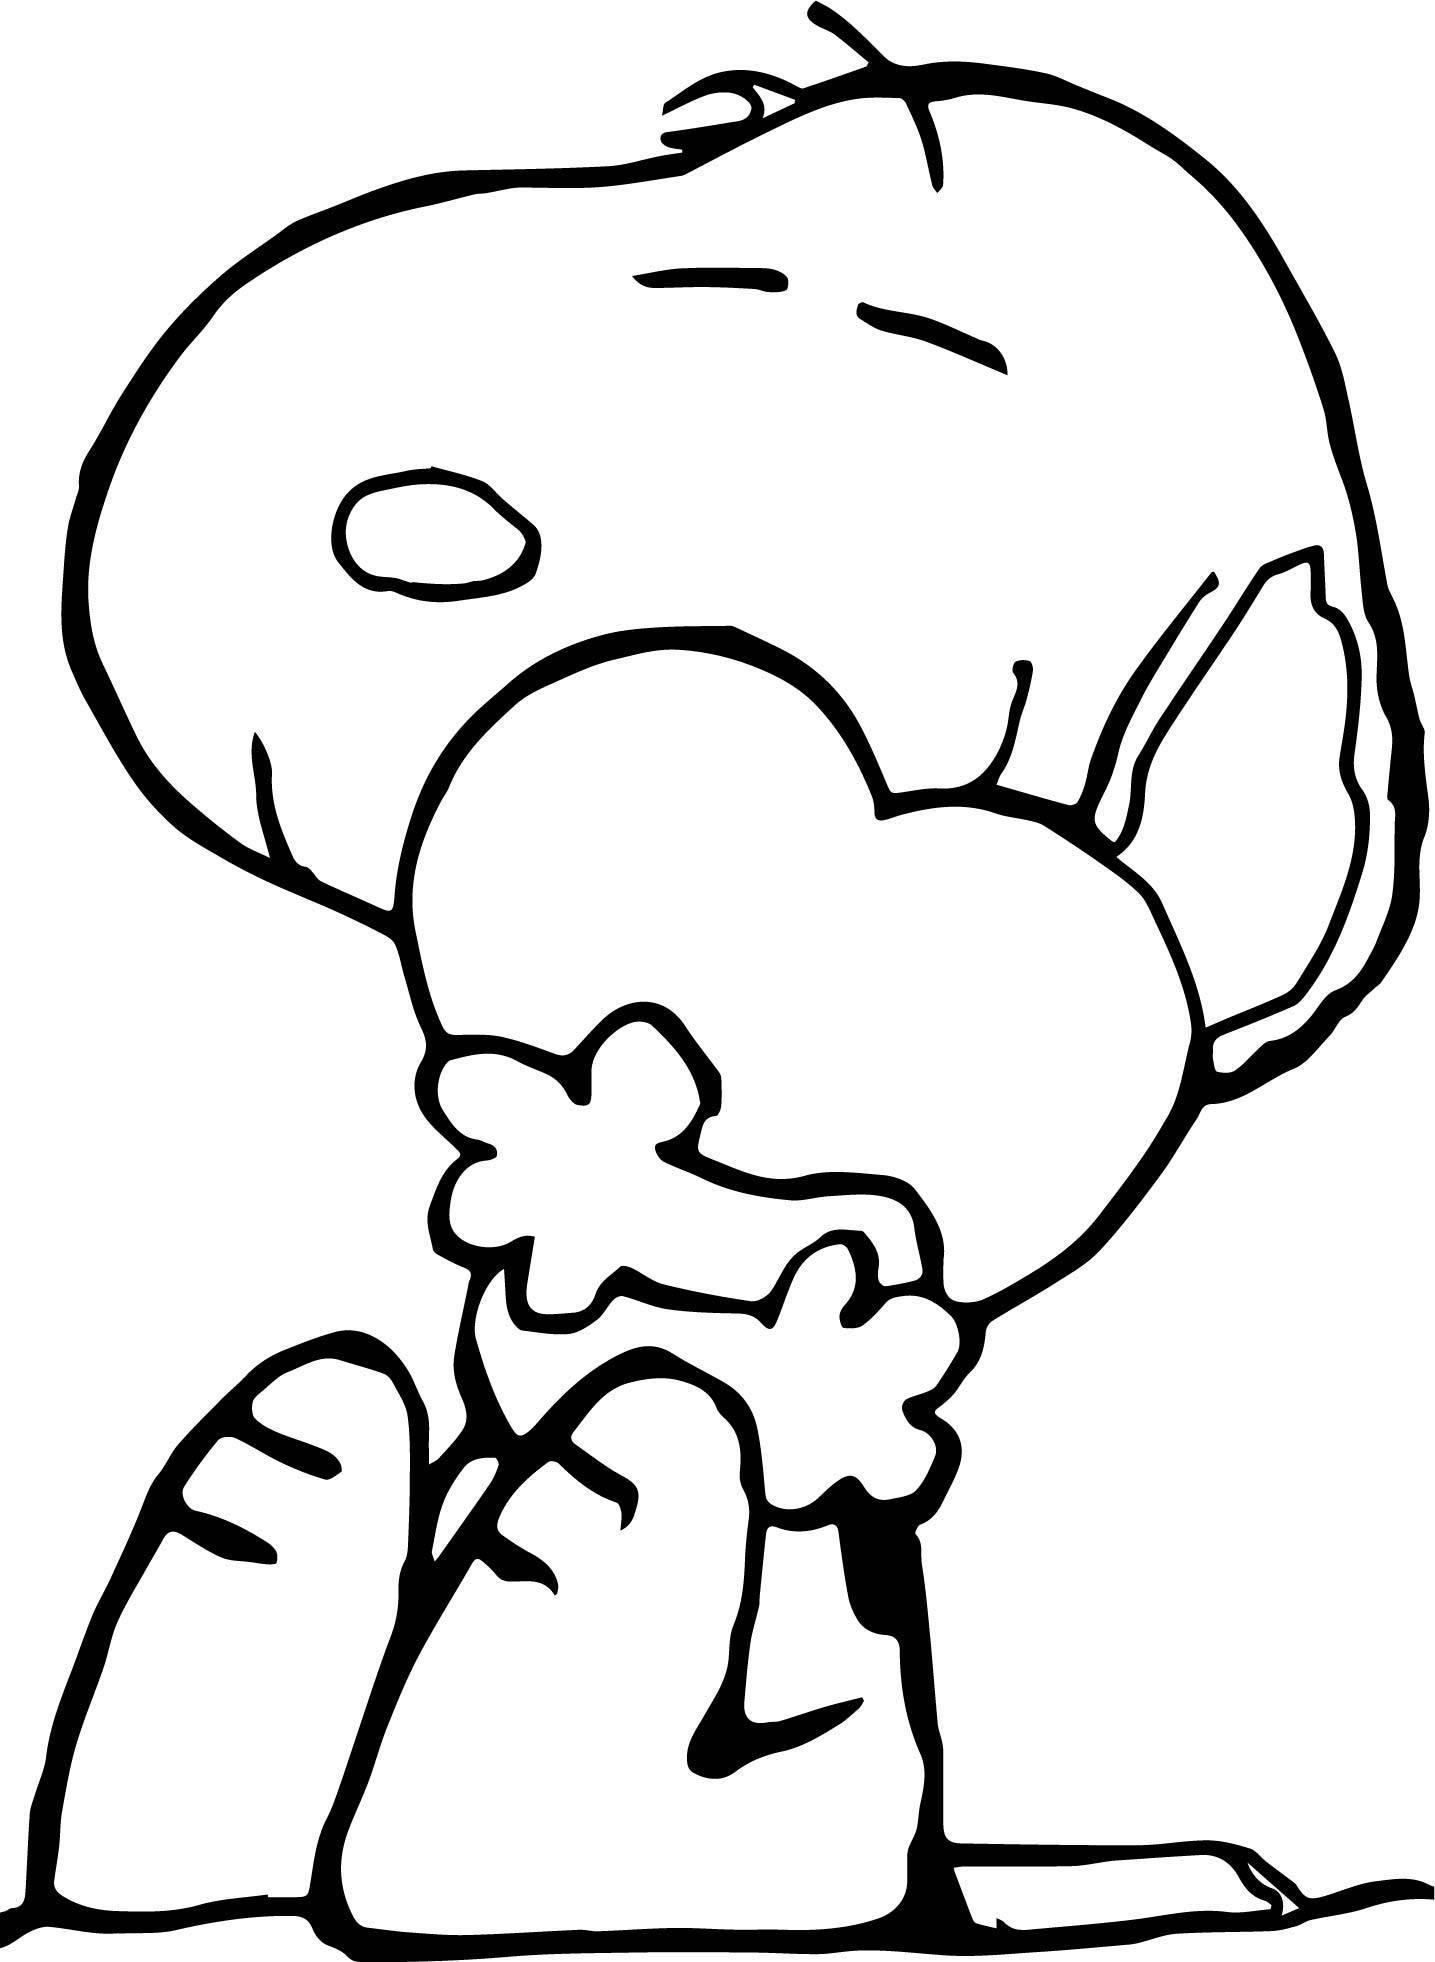 Snoopy And Woodstock Coloring Pages Snoopy Valentine Coloring Pages At Getdrawings Free For